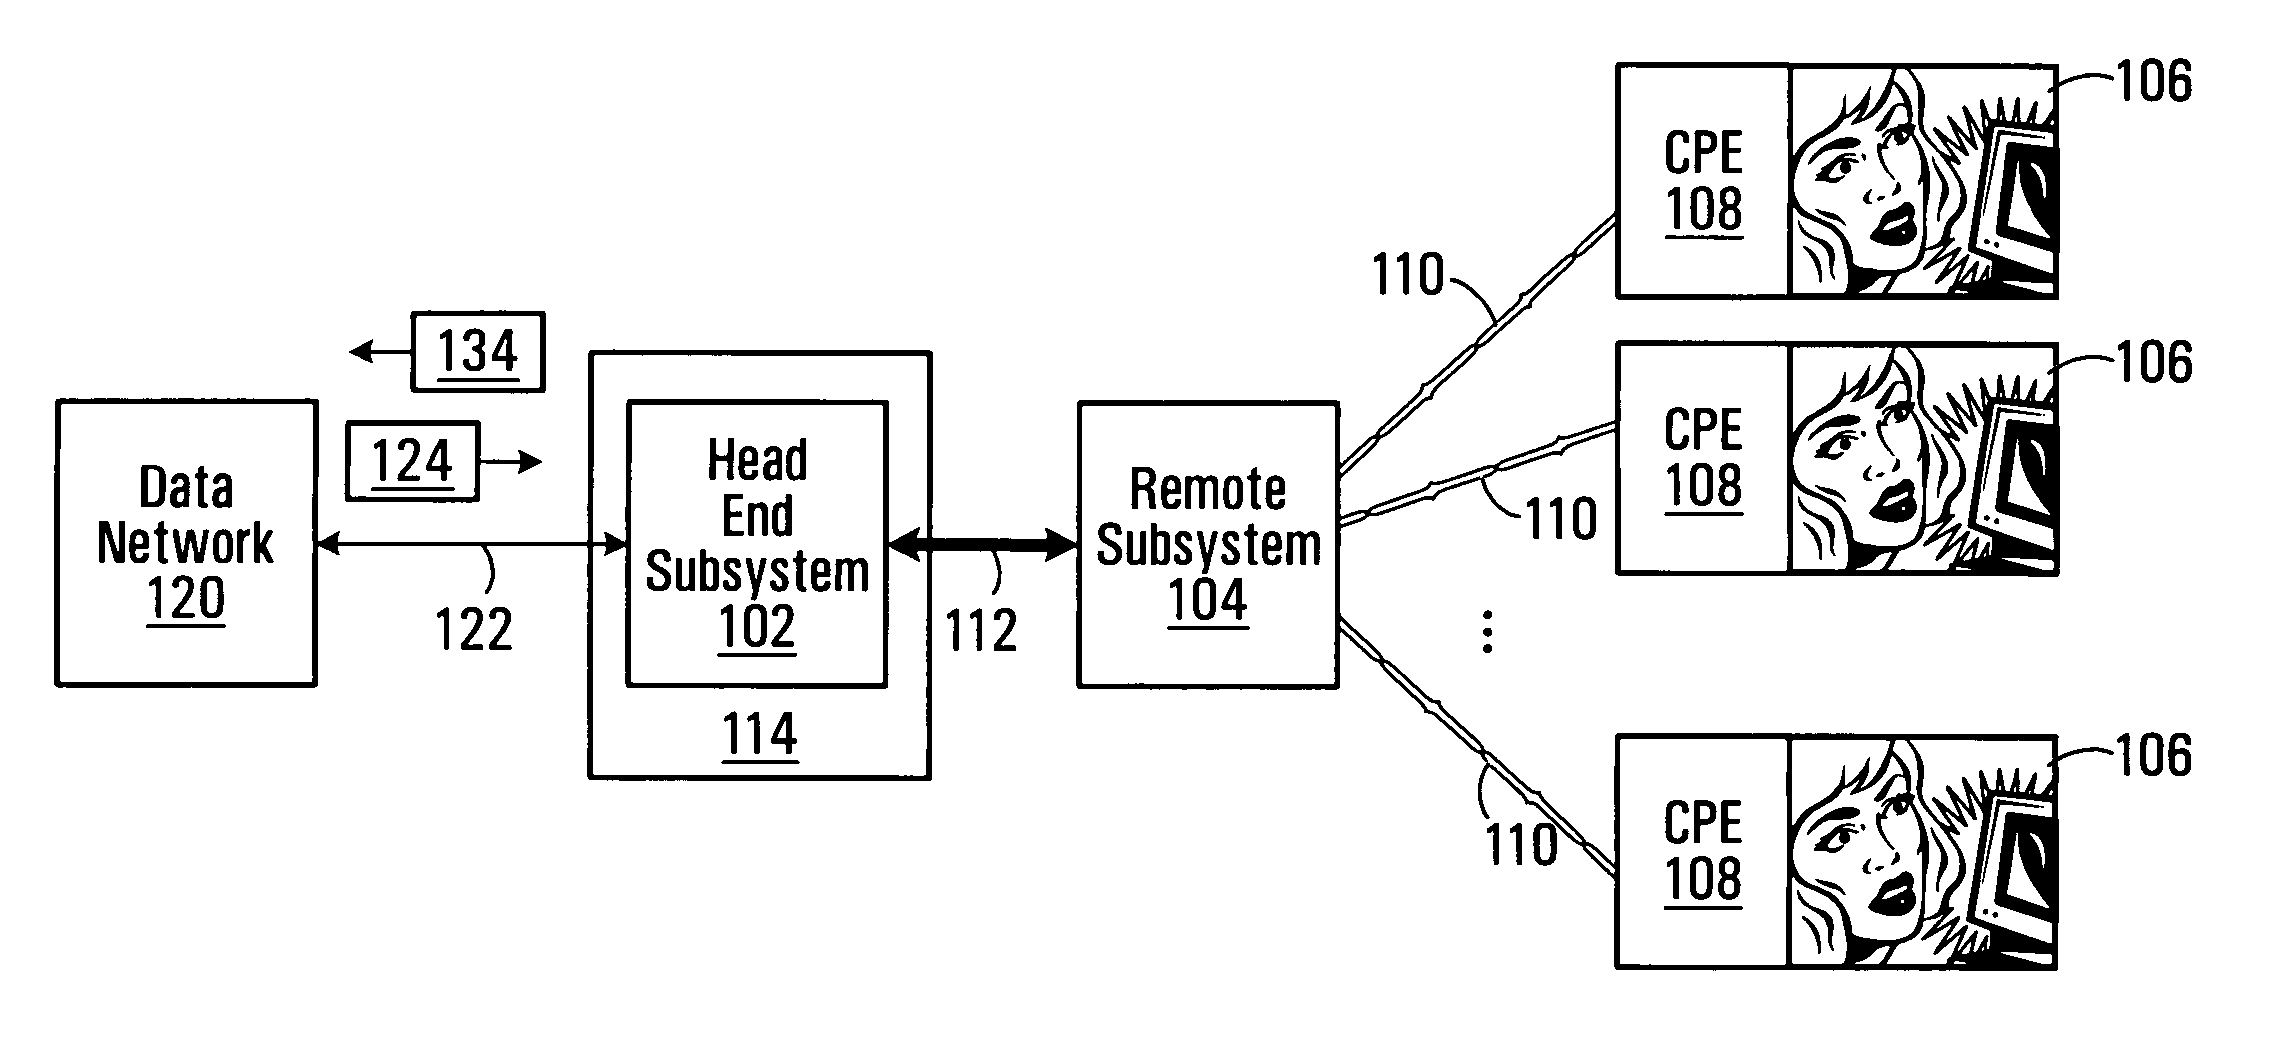 Distributed digital subscriber line access multiplexer